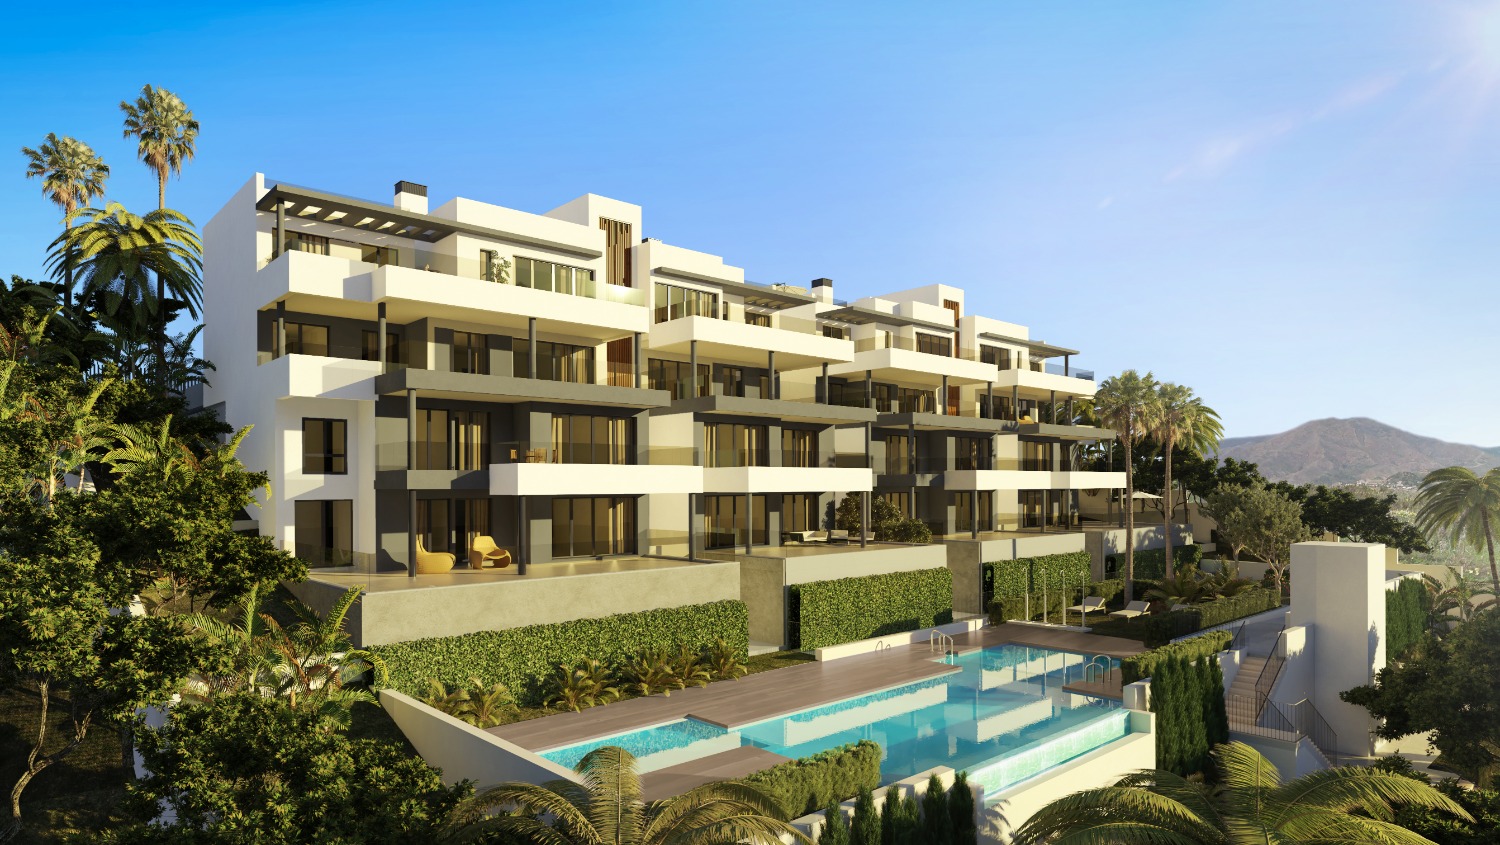 Prices from 297,300 euros. Beautiful residential complex with 187 homes of 1, 2, 3 and 4 bedroom. Estepona